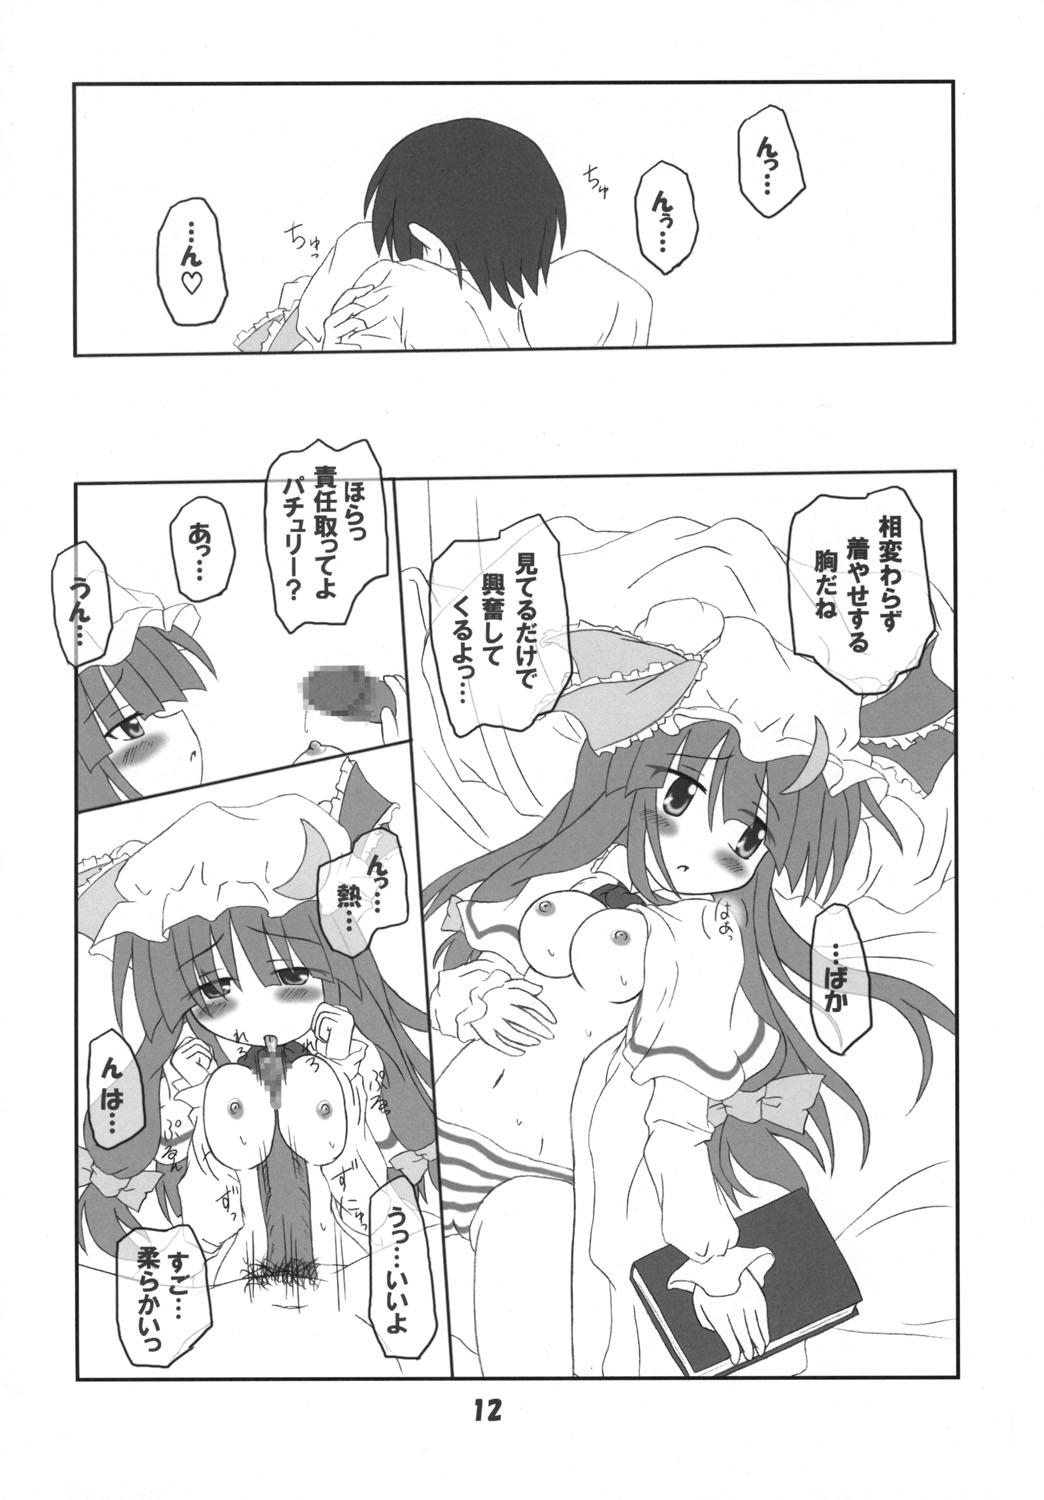 Bribe Rollin 18 - Touhou project Raw - Page 11